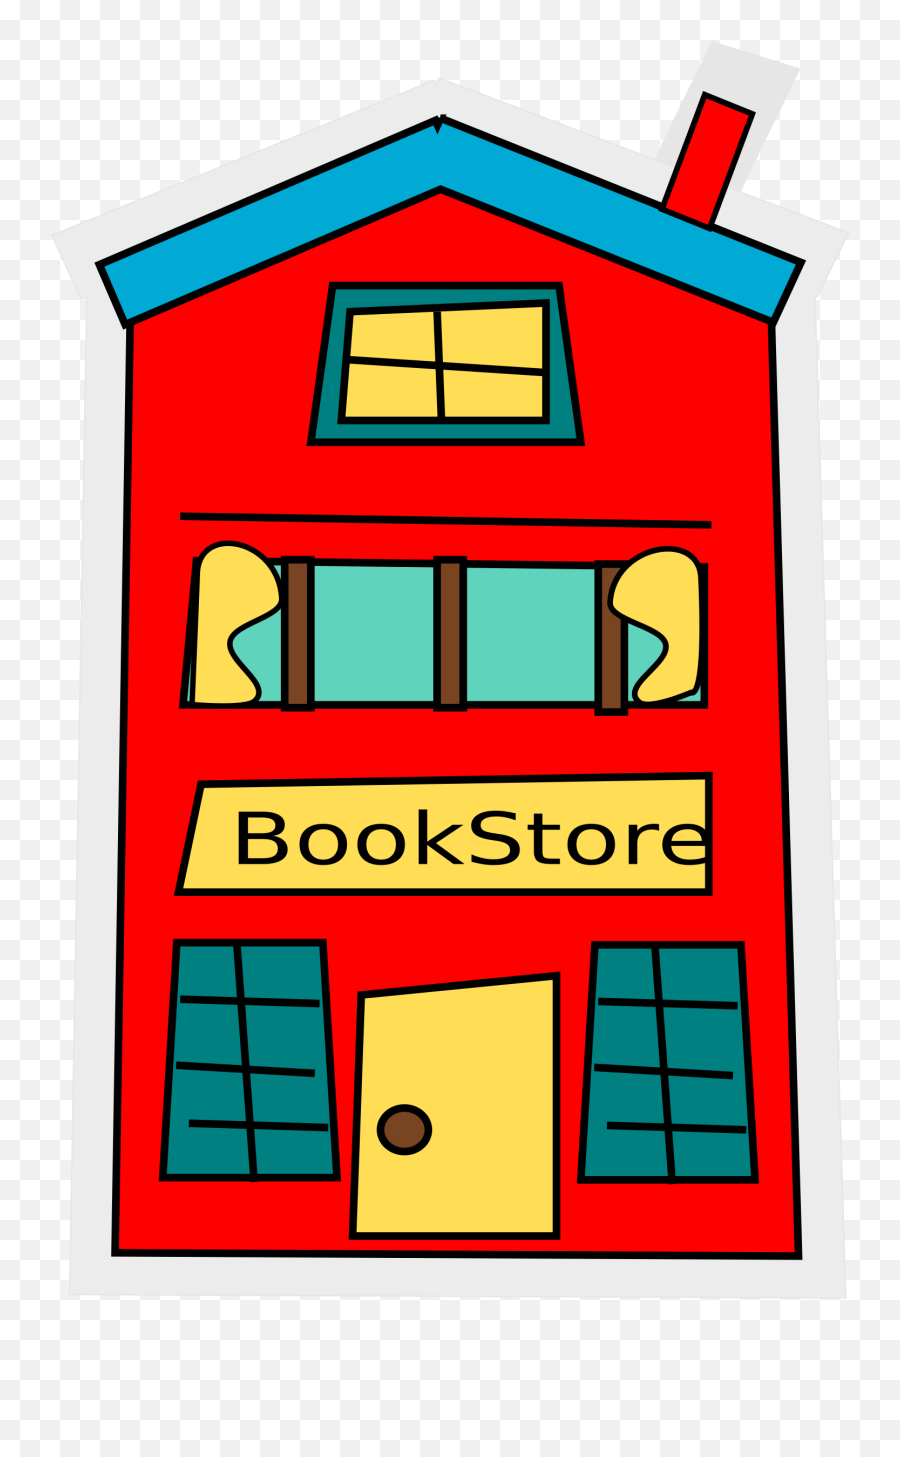 Clipart Of The Book Store Free Image - Book Store Transparent Emoji,Store Clipart